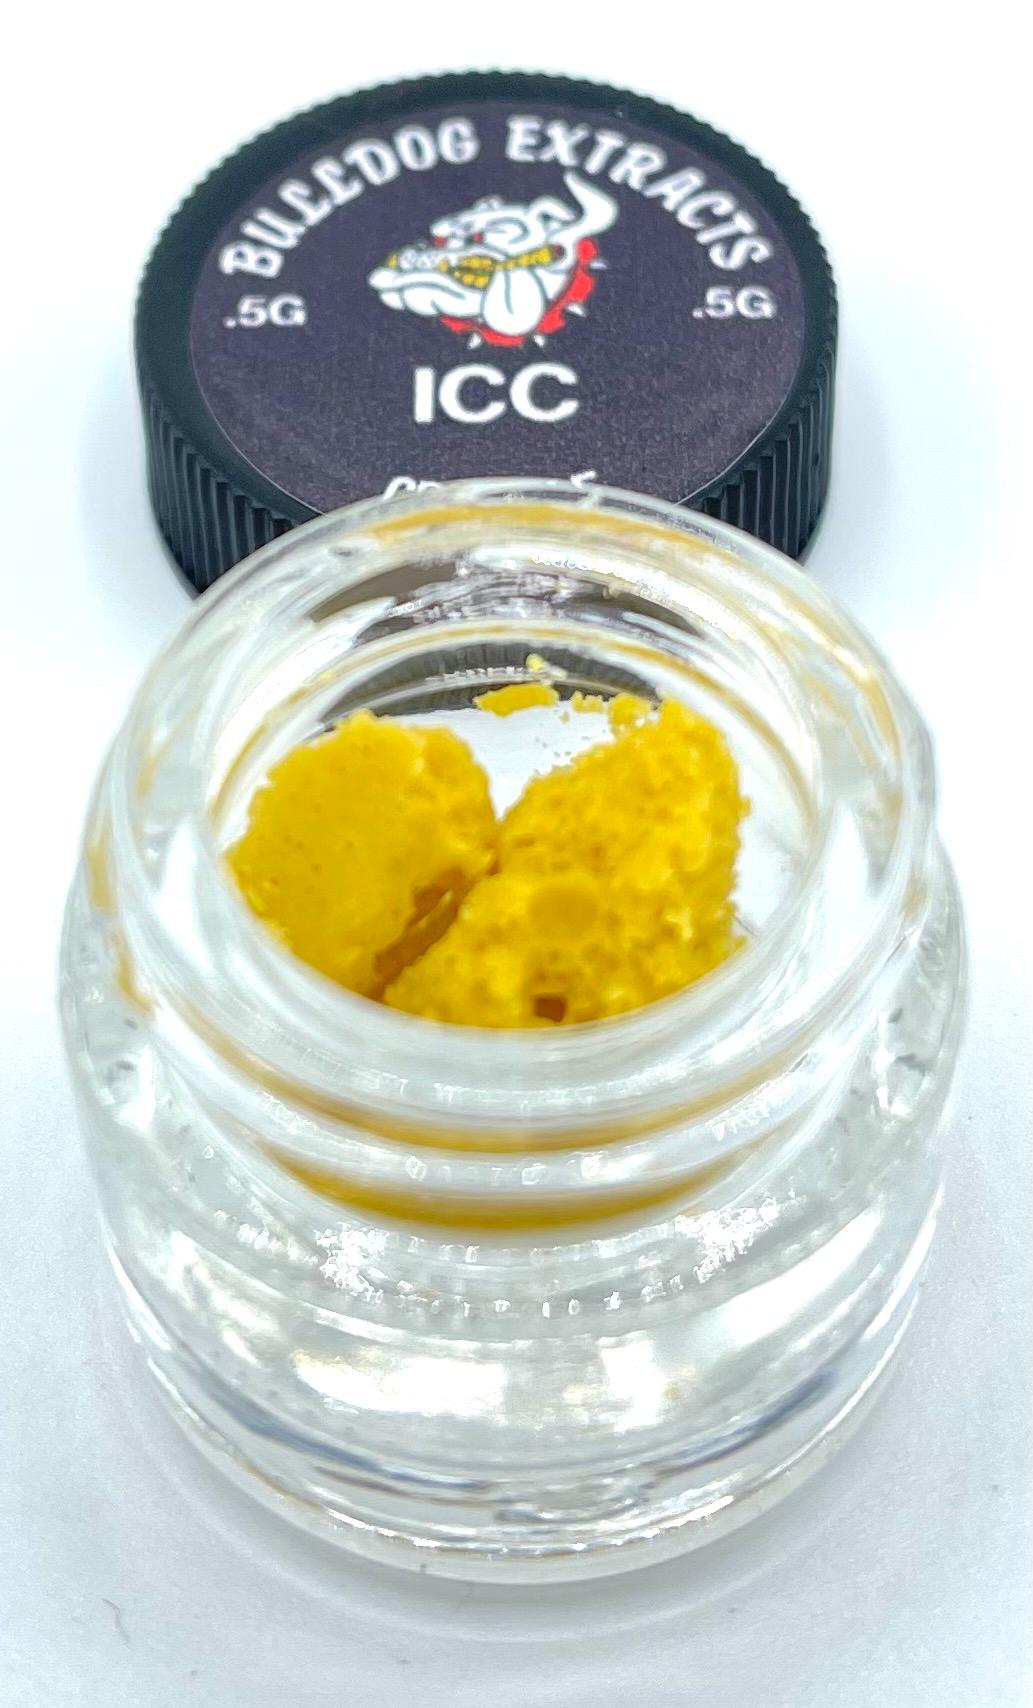 Bulldog Extracts Crumble *3g for $60*